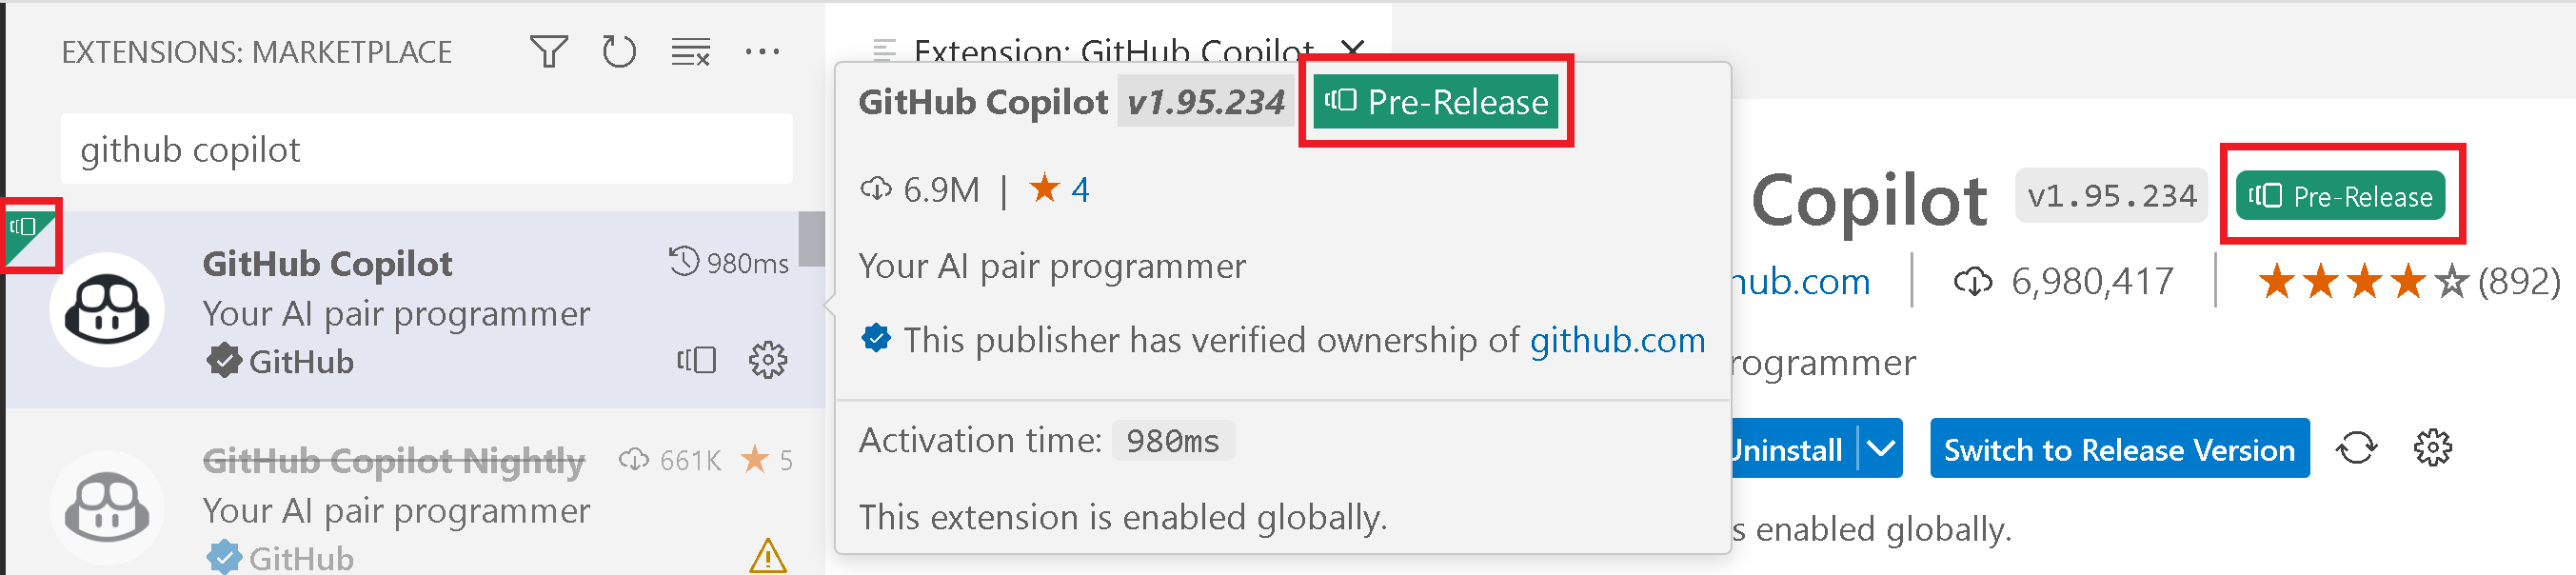 Pre-release version of the GitHub Copilot extension